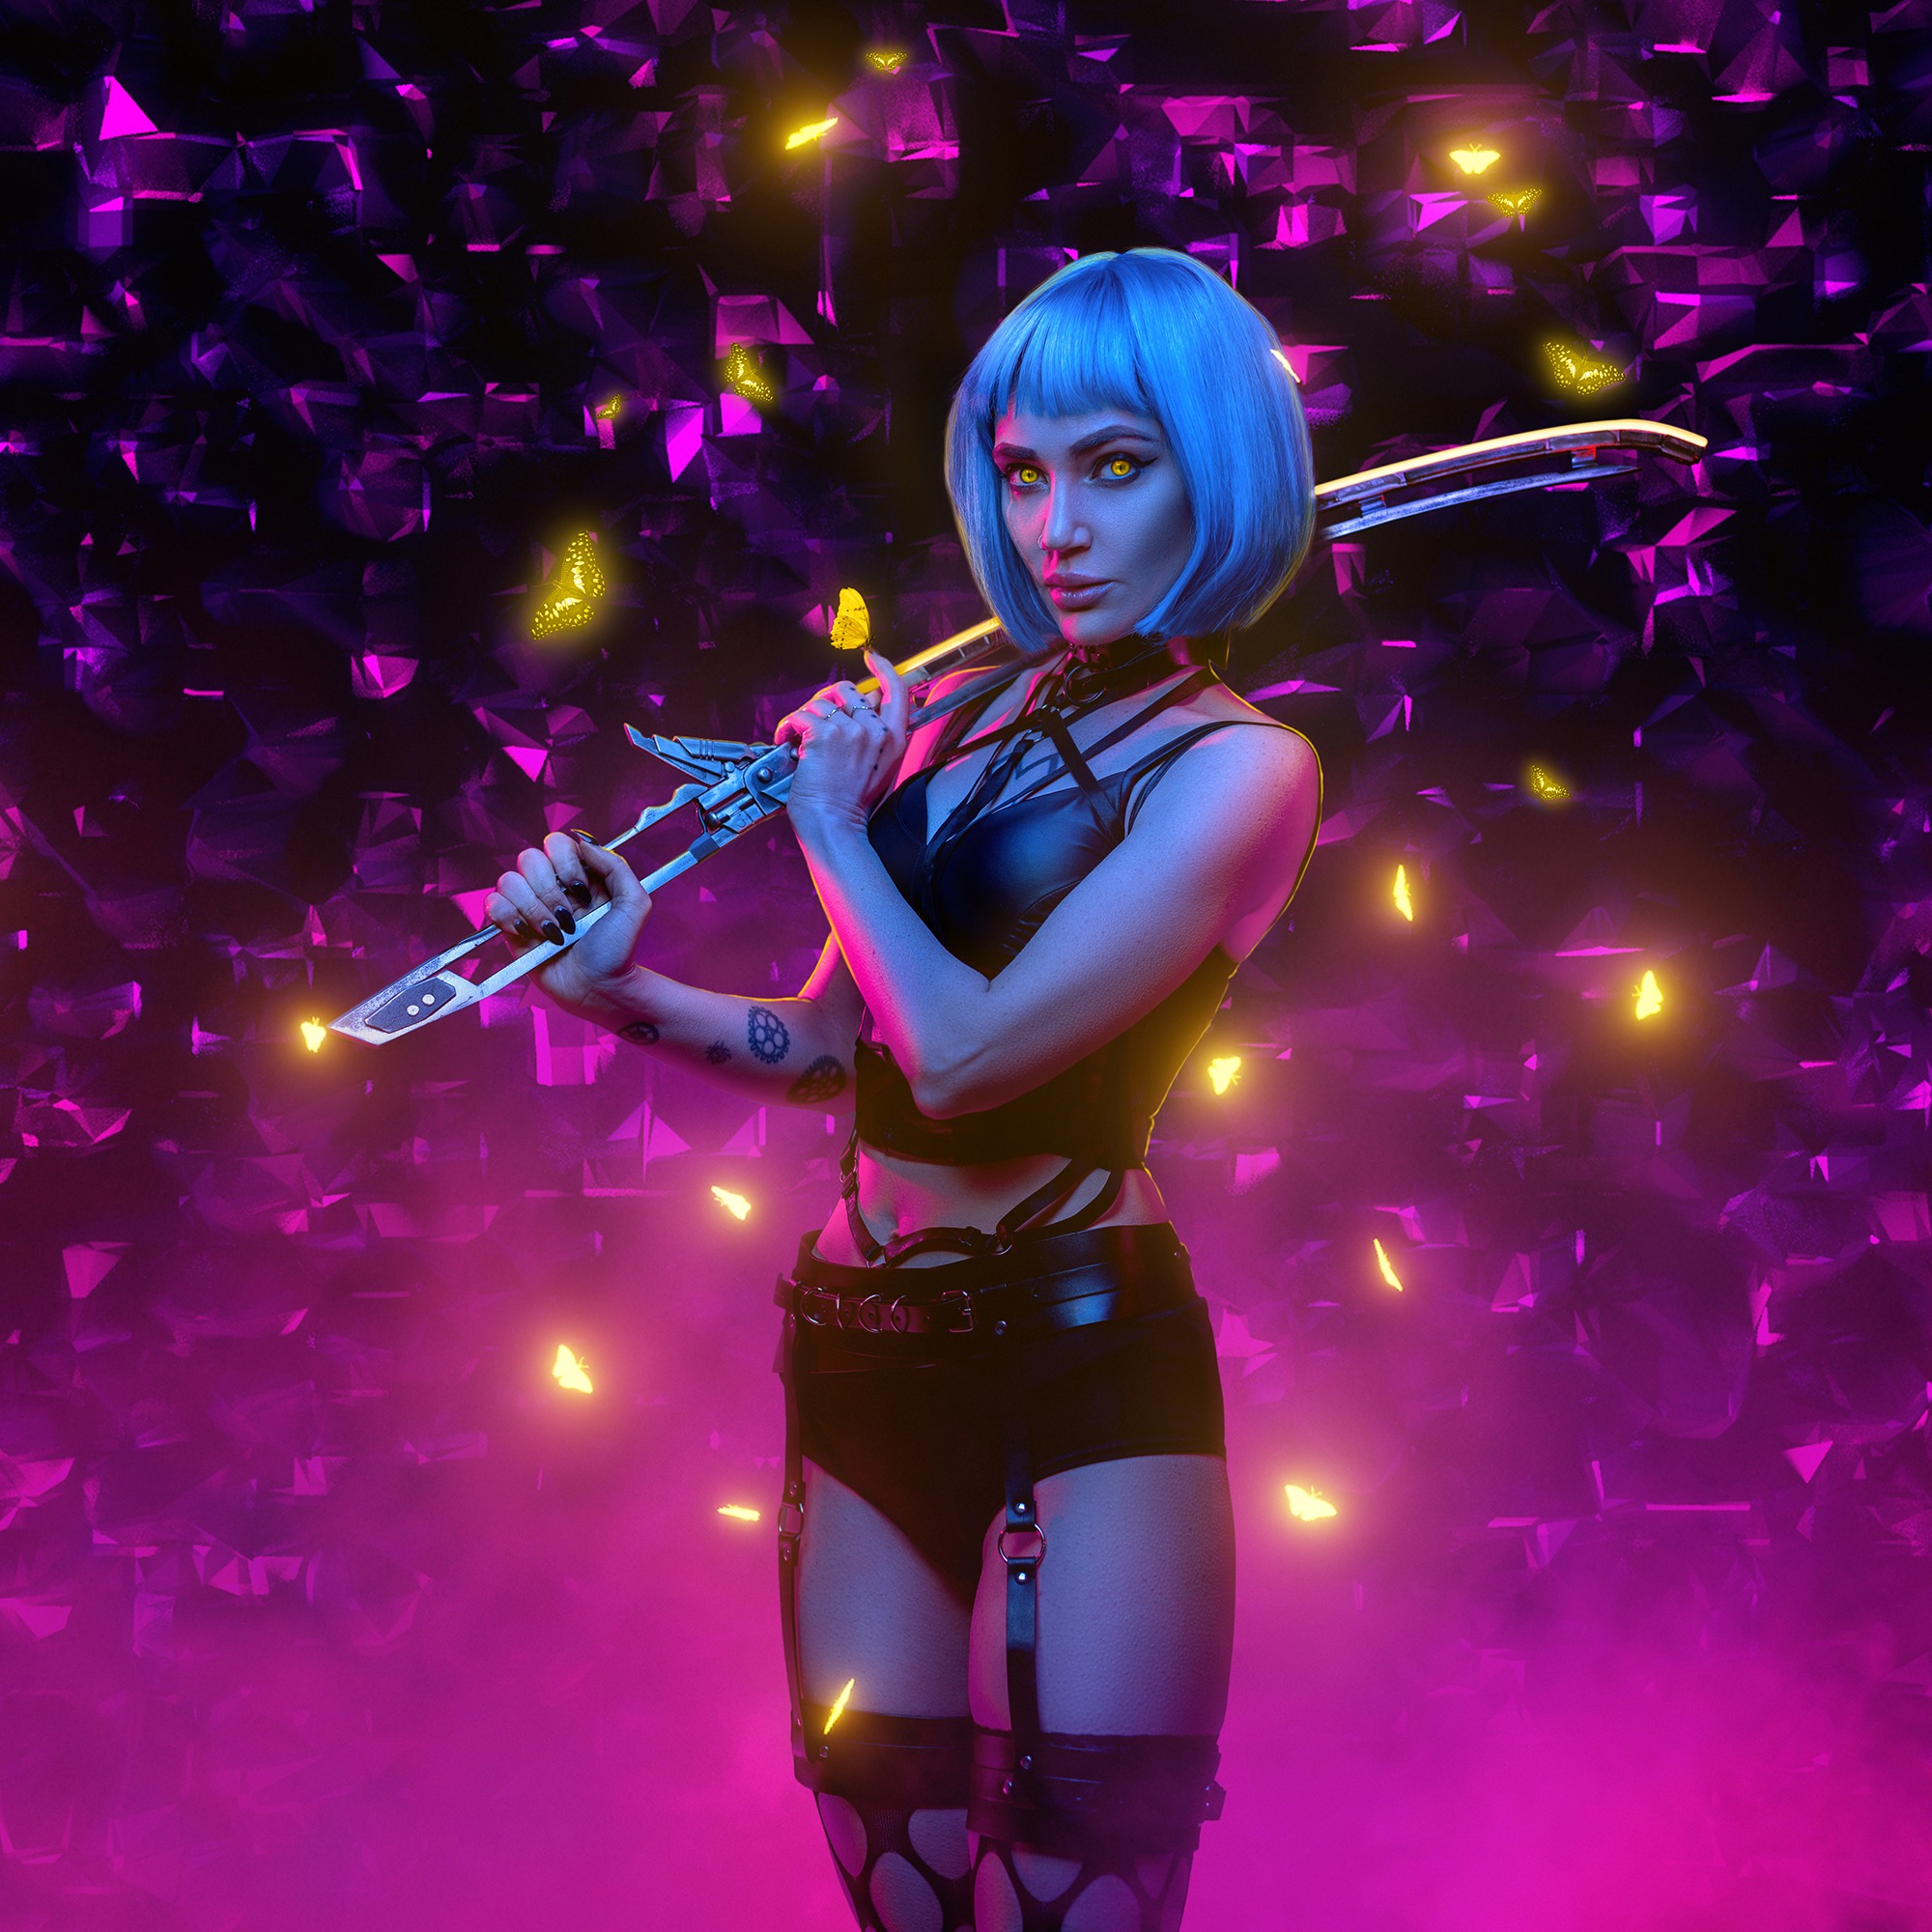 Cyberpunk woman with sword against abstract background